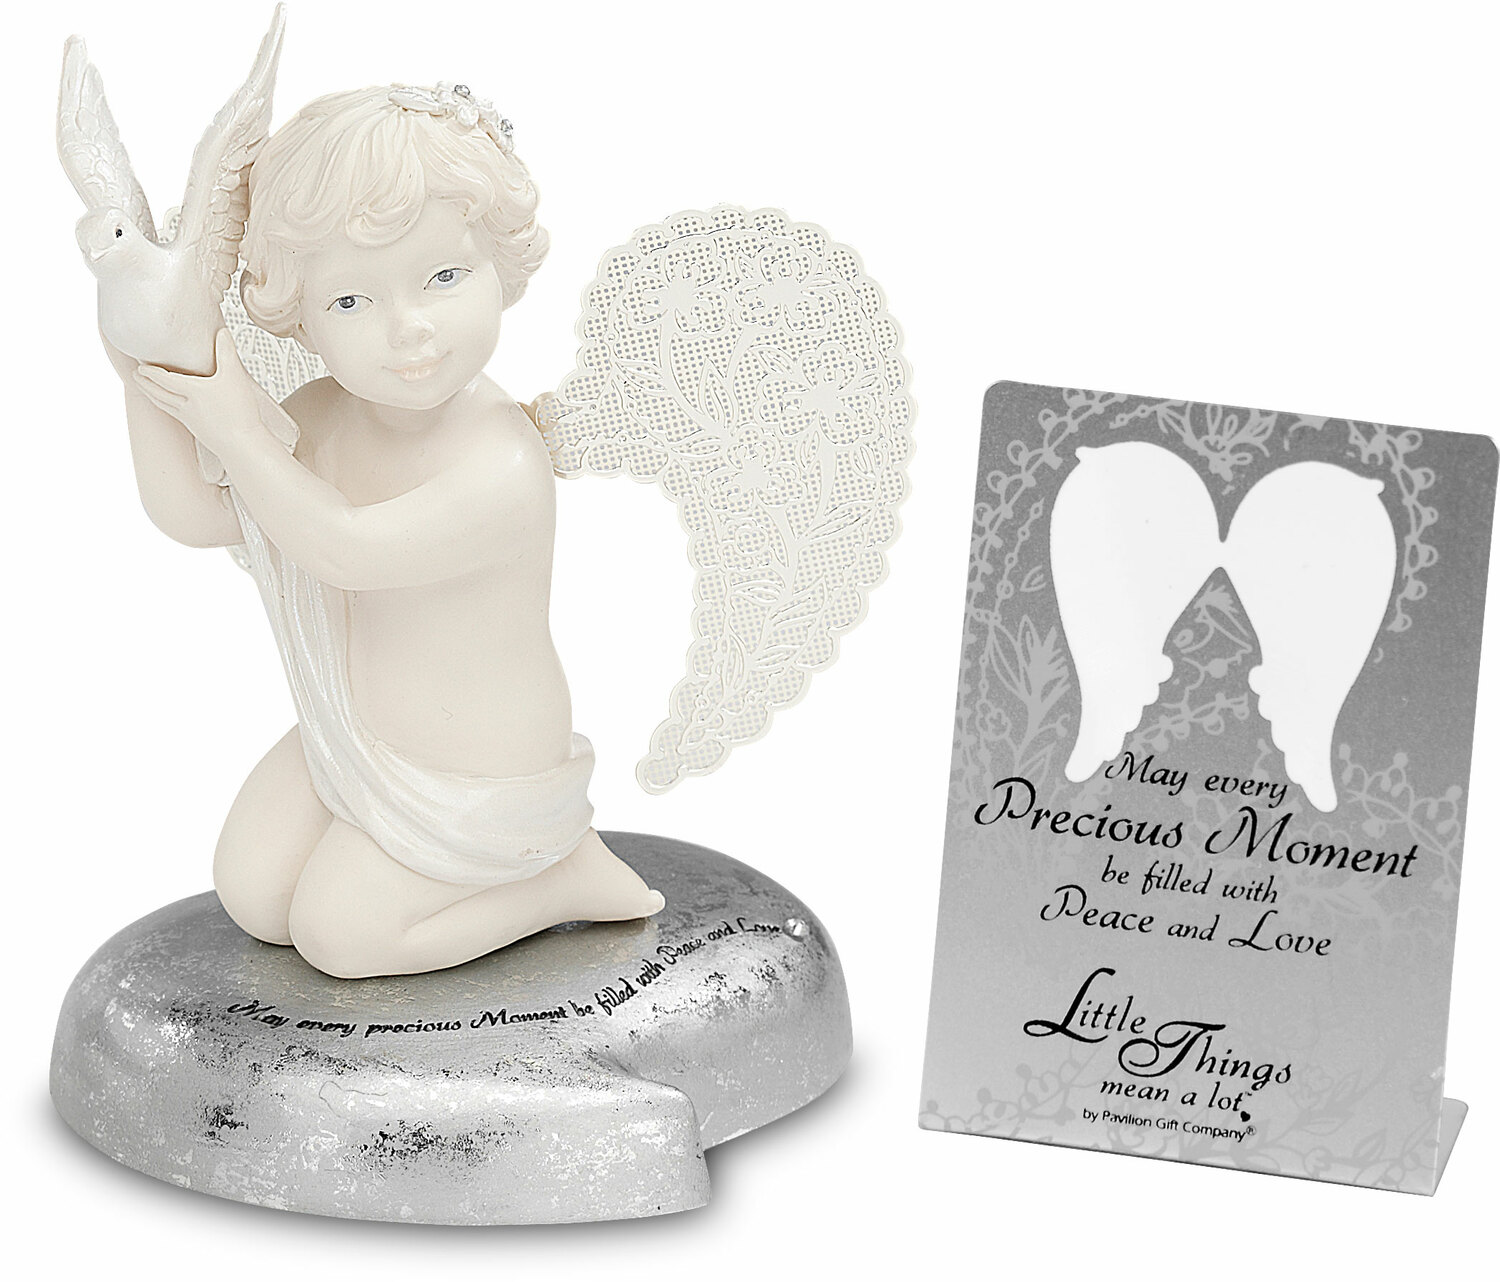 Peace by Little Things Mean A Lot - Peace - 3.5" Cherub Holding Dove